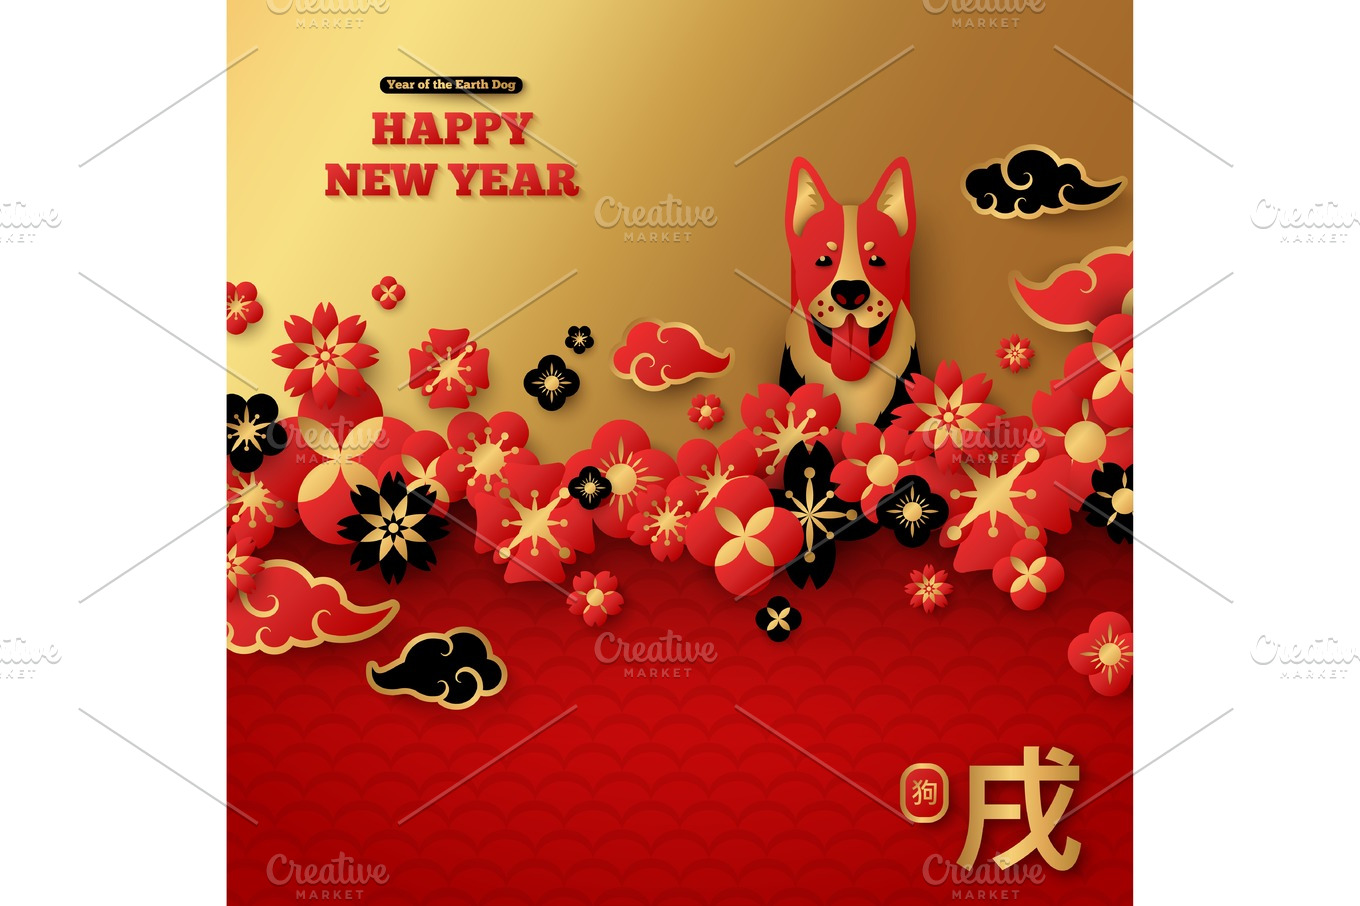 2018 Chinese New Year Greeting Card with Floral Border ~ Illustrations ~ Creative Market1360 x 906